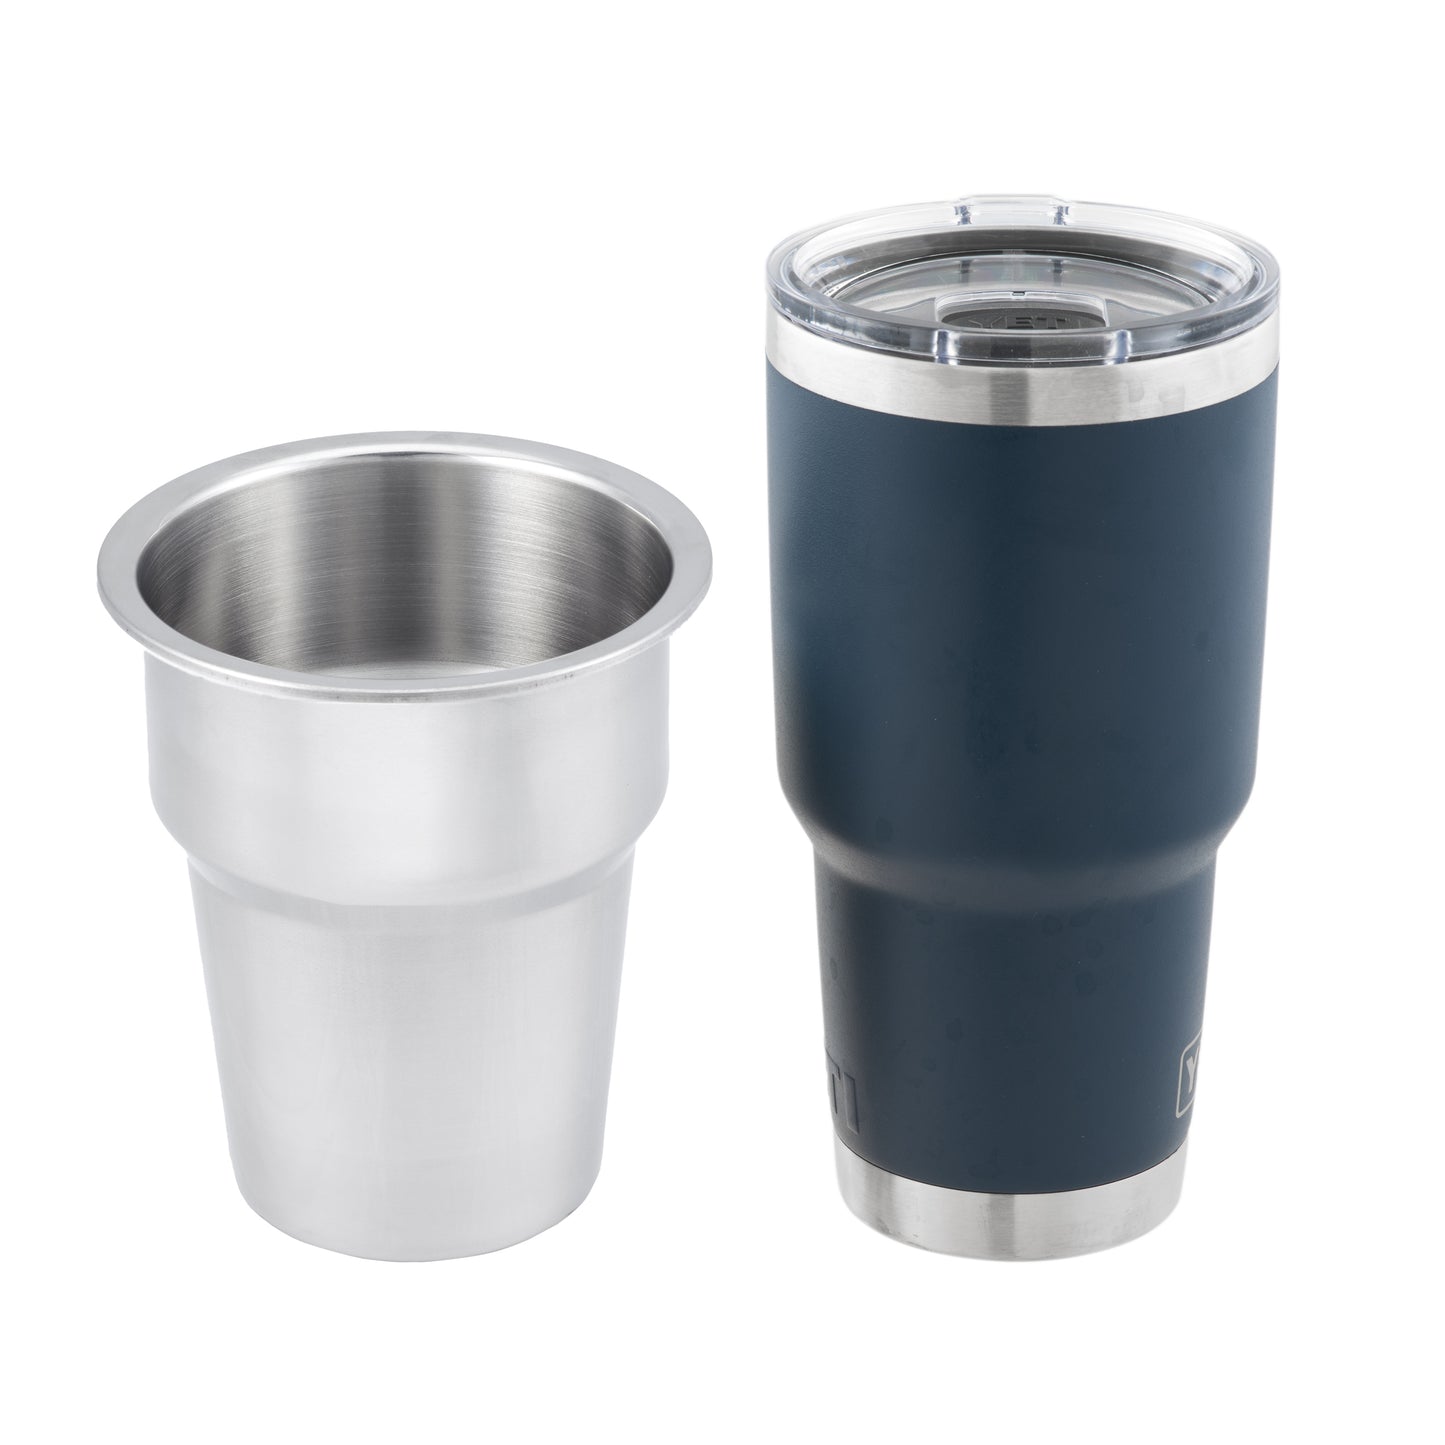 Extra Large Stainless Steel Cupholder